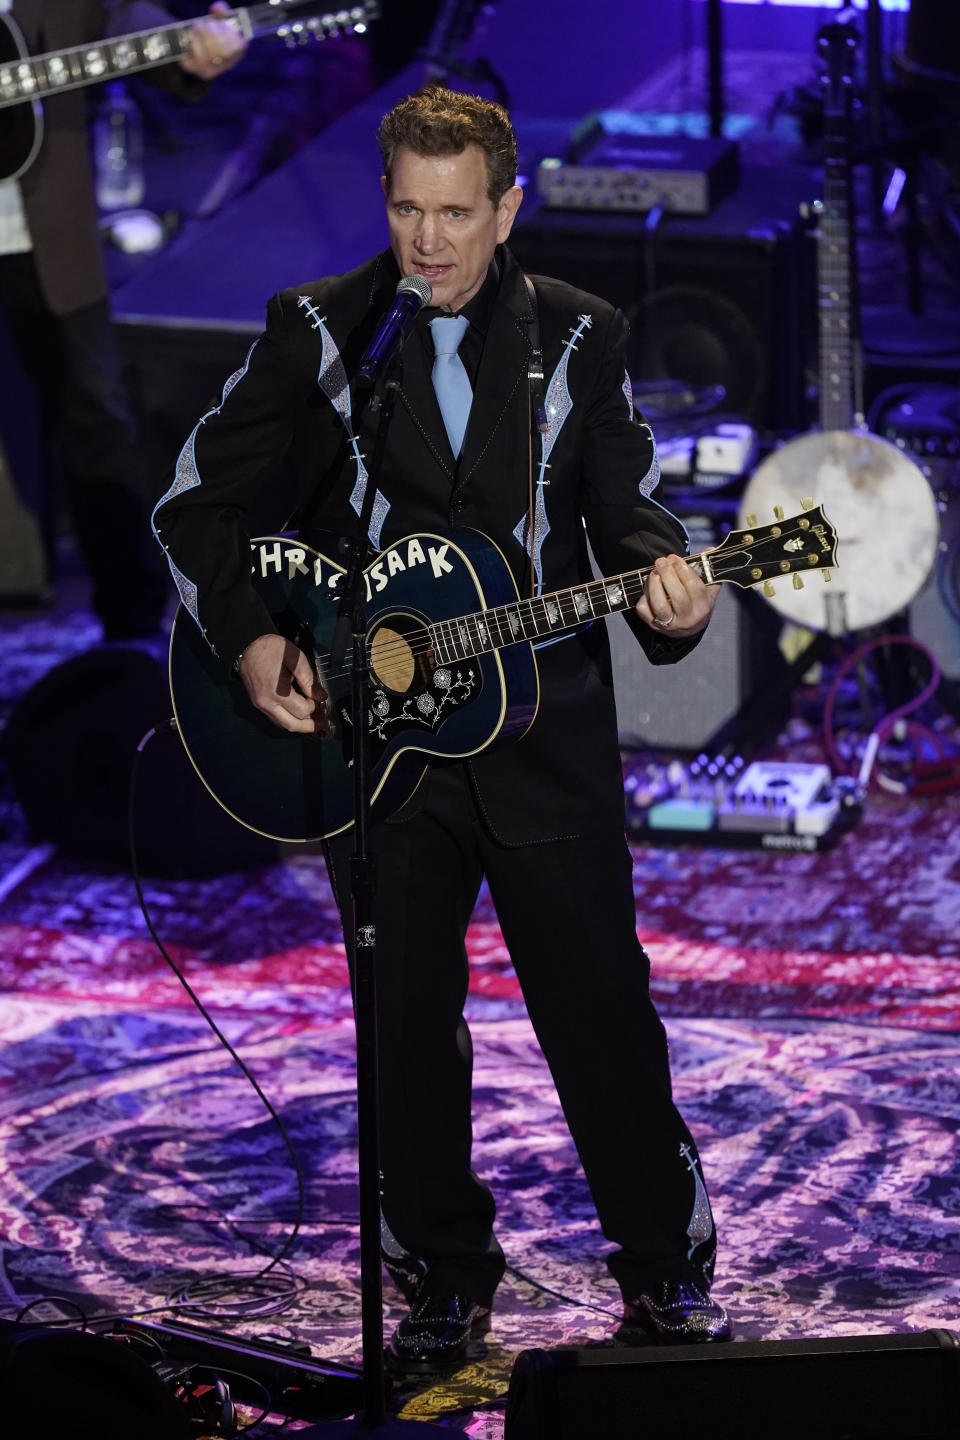 Chris Isaak performs at the Americana Honors & Awards show Wednesday, Sept. 14, 2022, in Nashville, Tenn. (AP Photo/Mark Humphrey)